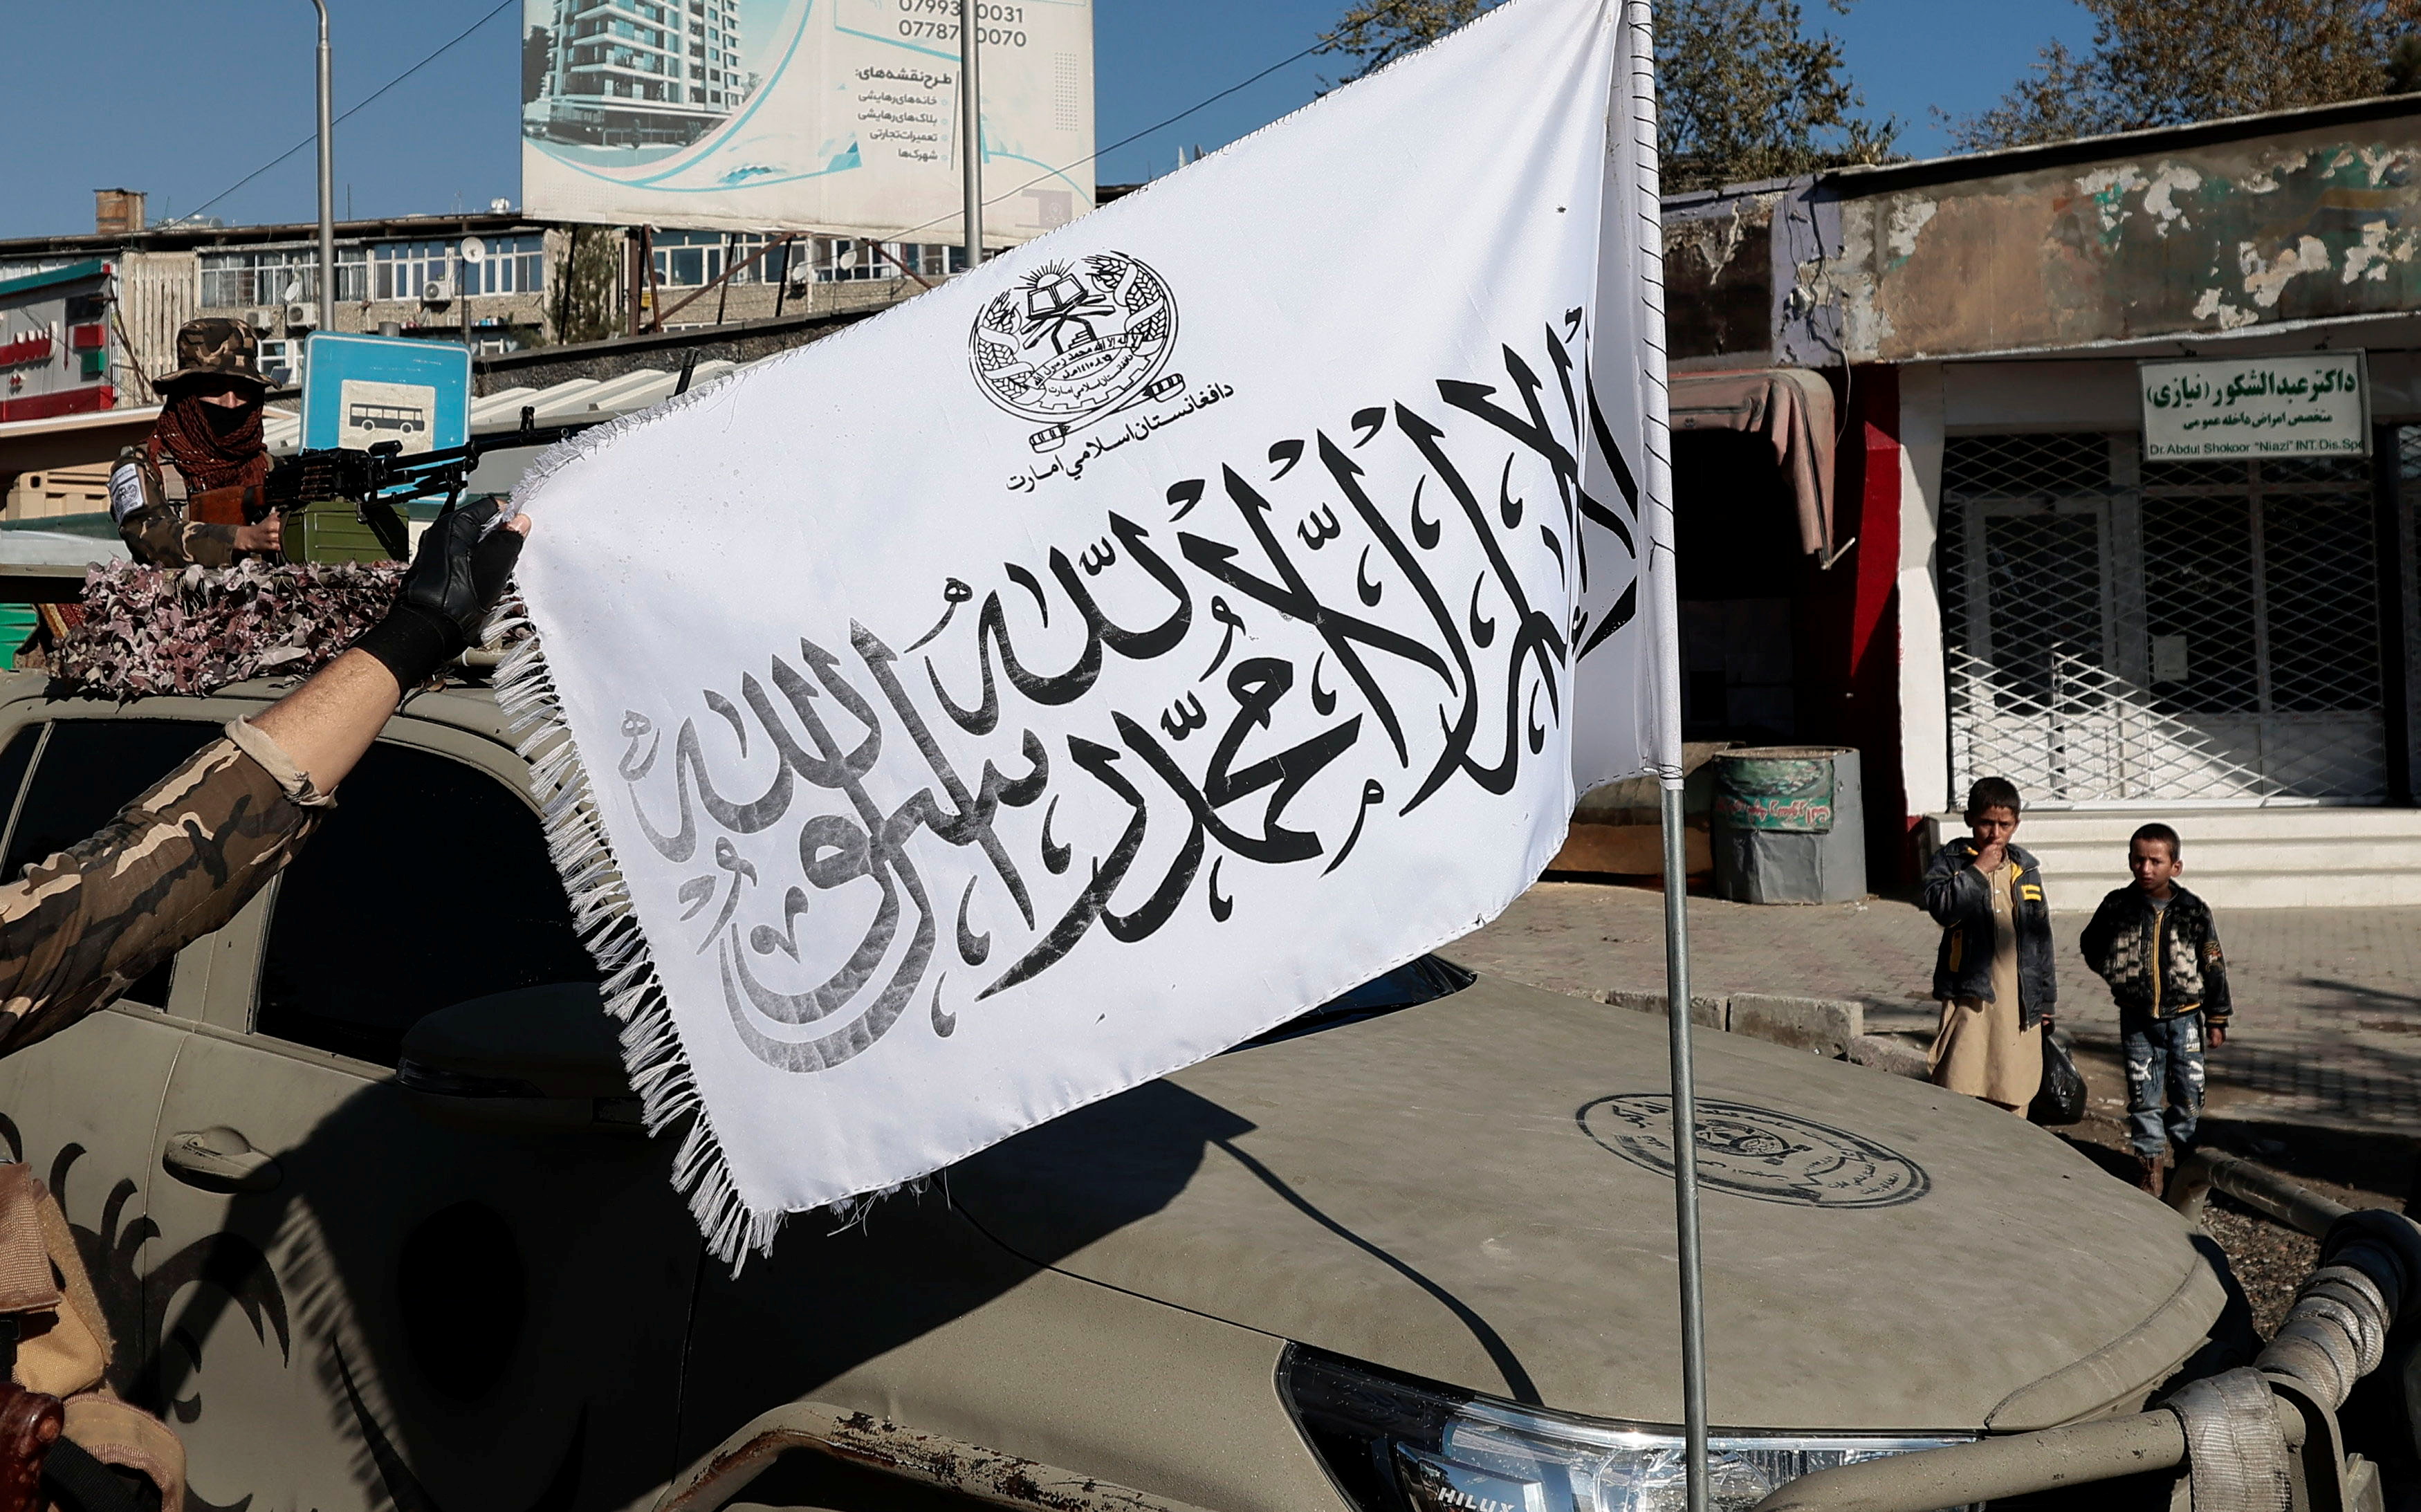 A Taliban fighter displays their flag as his comrade watches, at a checkpoint in Kabul, Afghanistan November 5, 2021. REUTERS/Zohra Bensemra